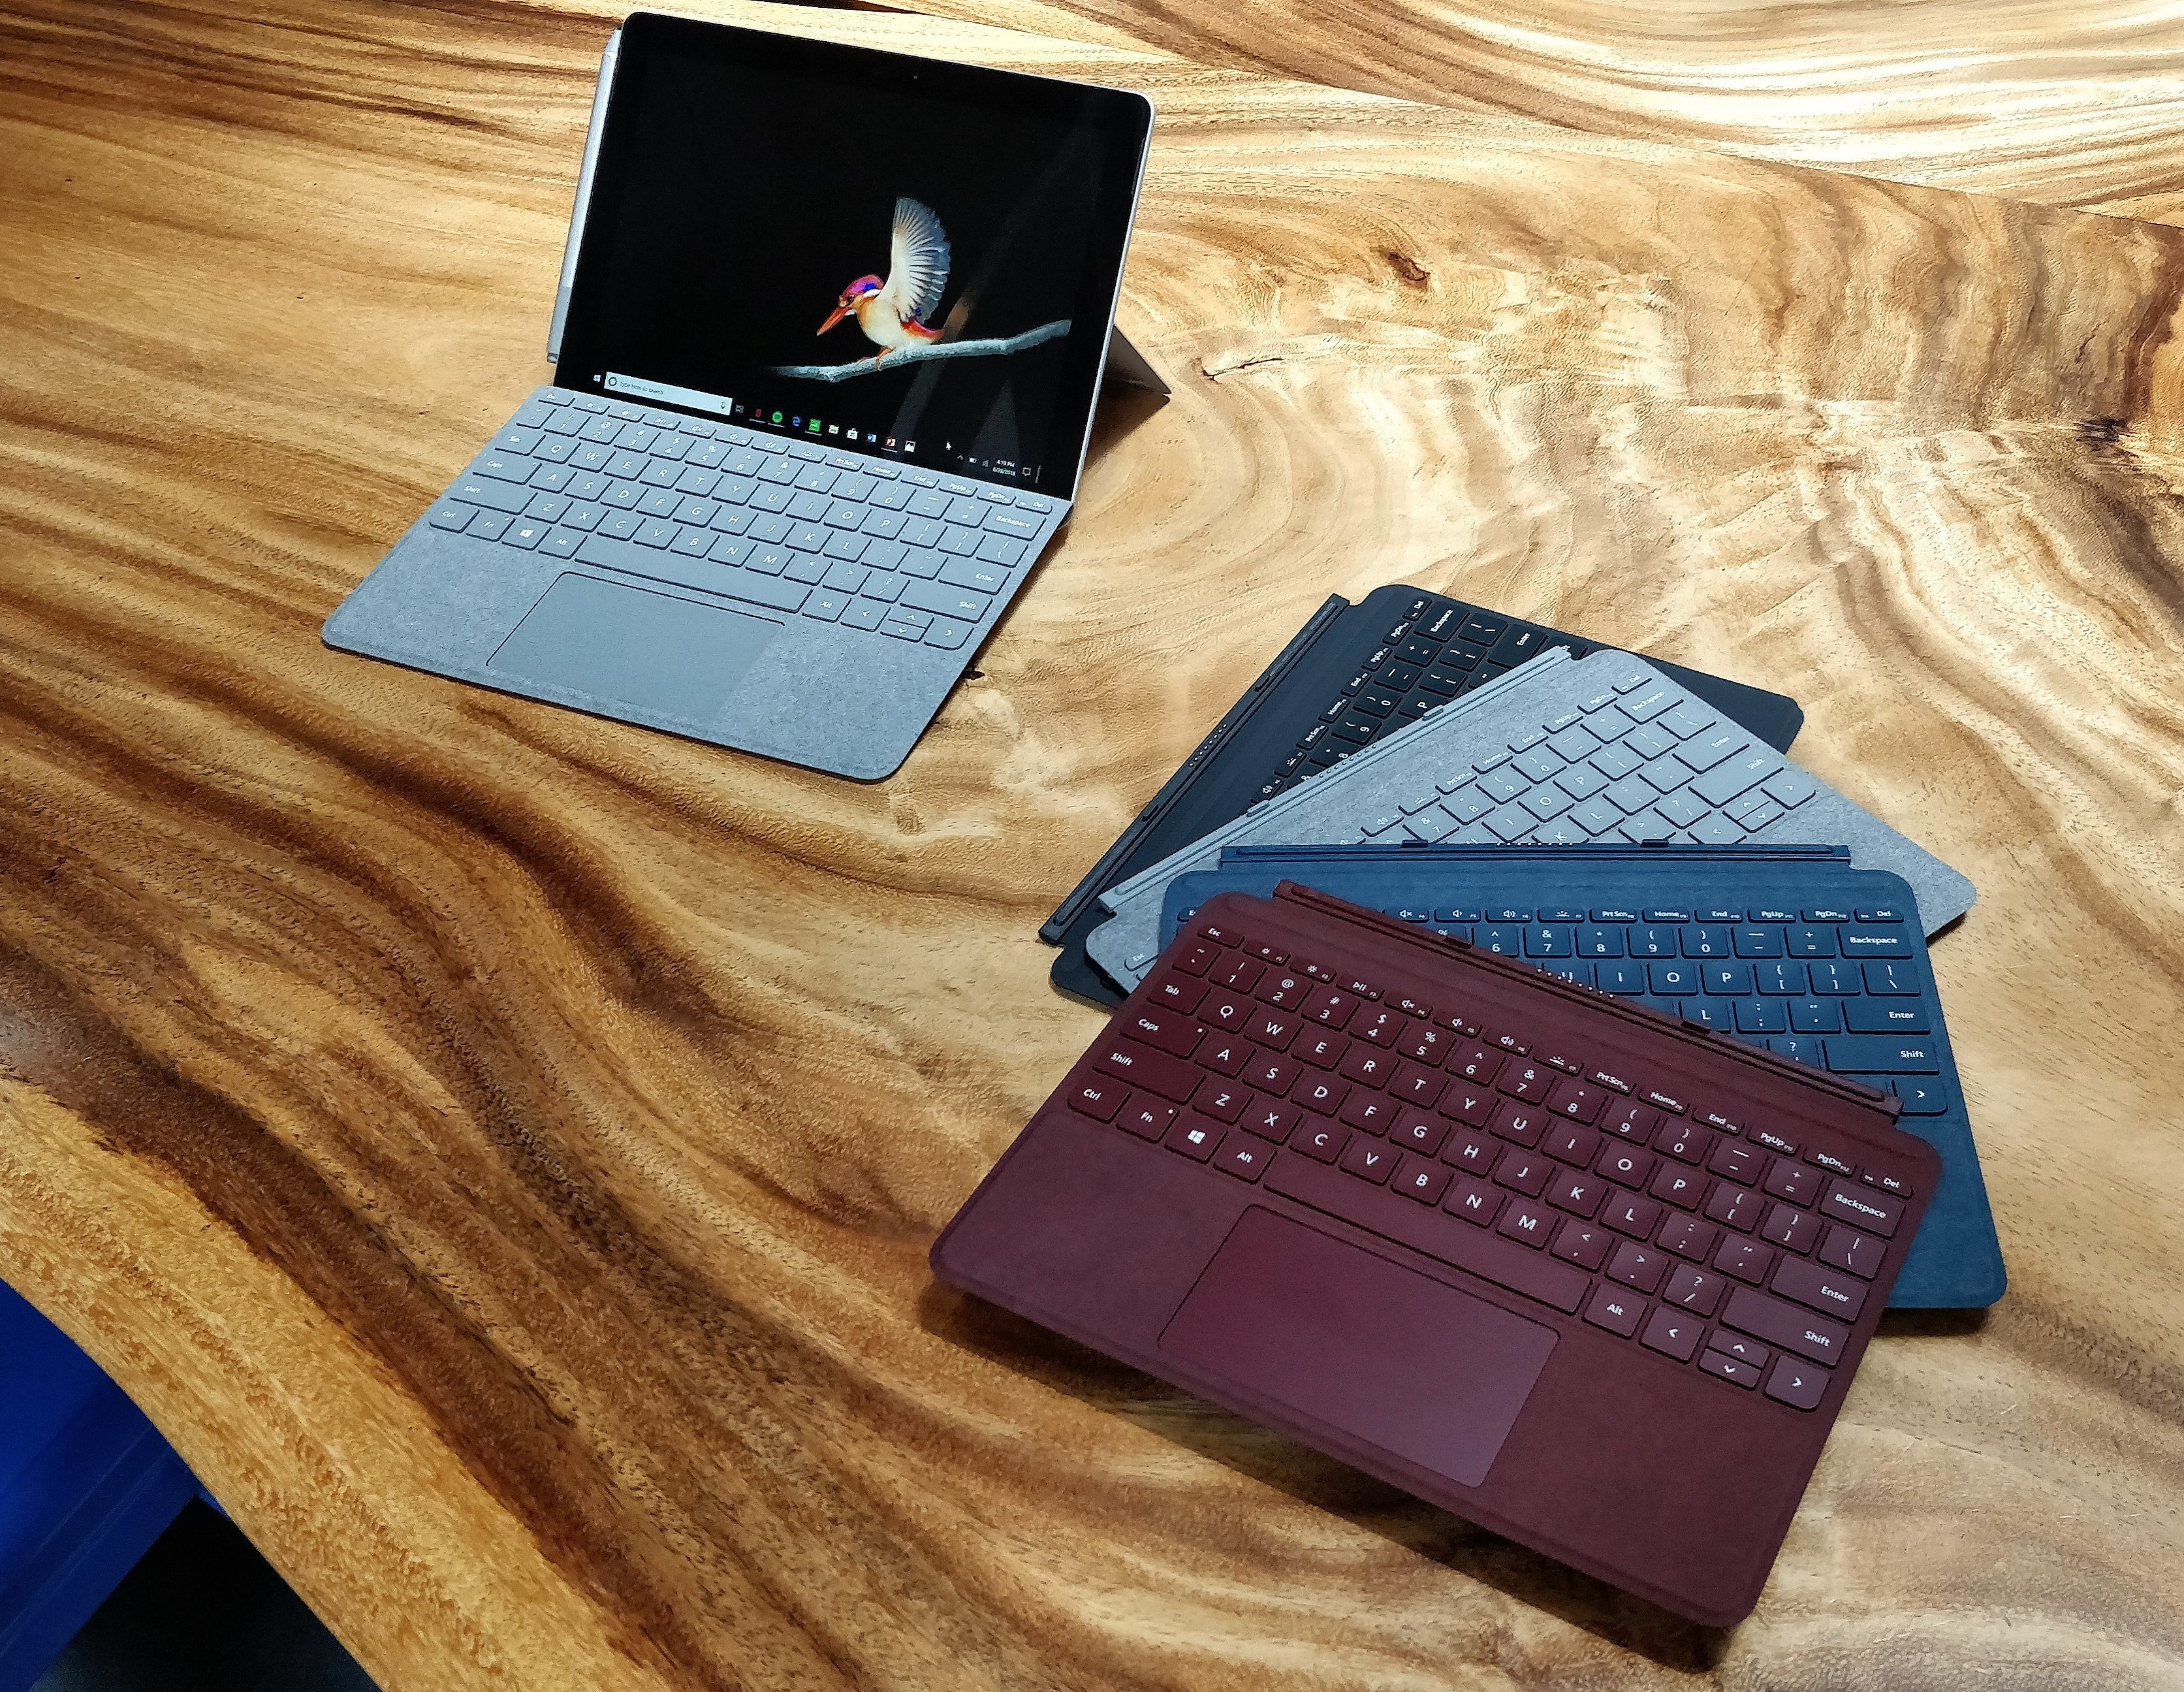 Microsoft Surface Go review: This affordable little Windows 10 S tablet